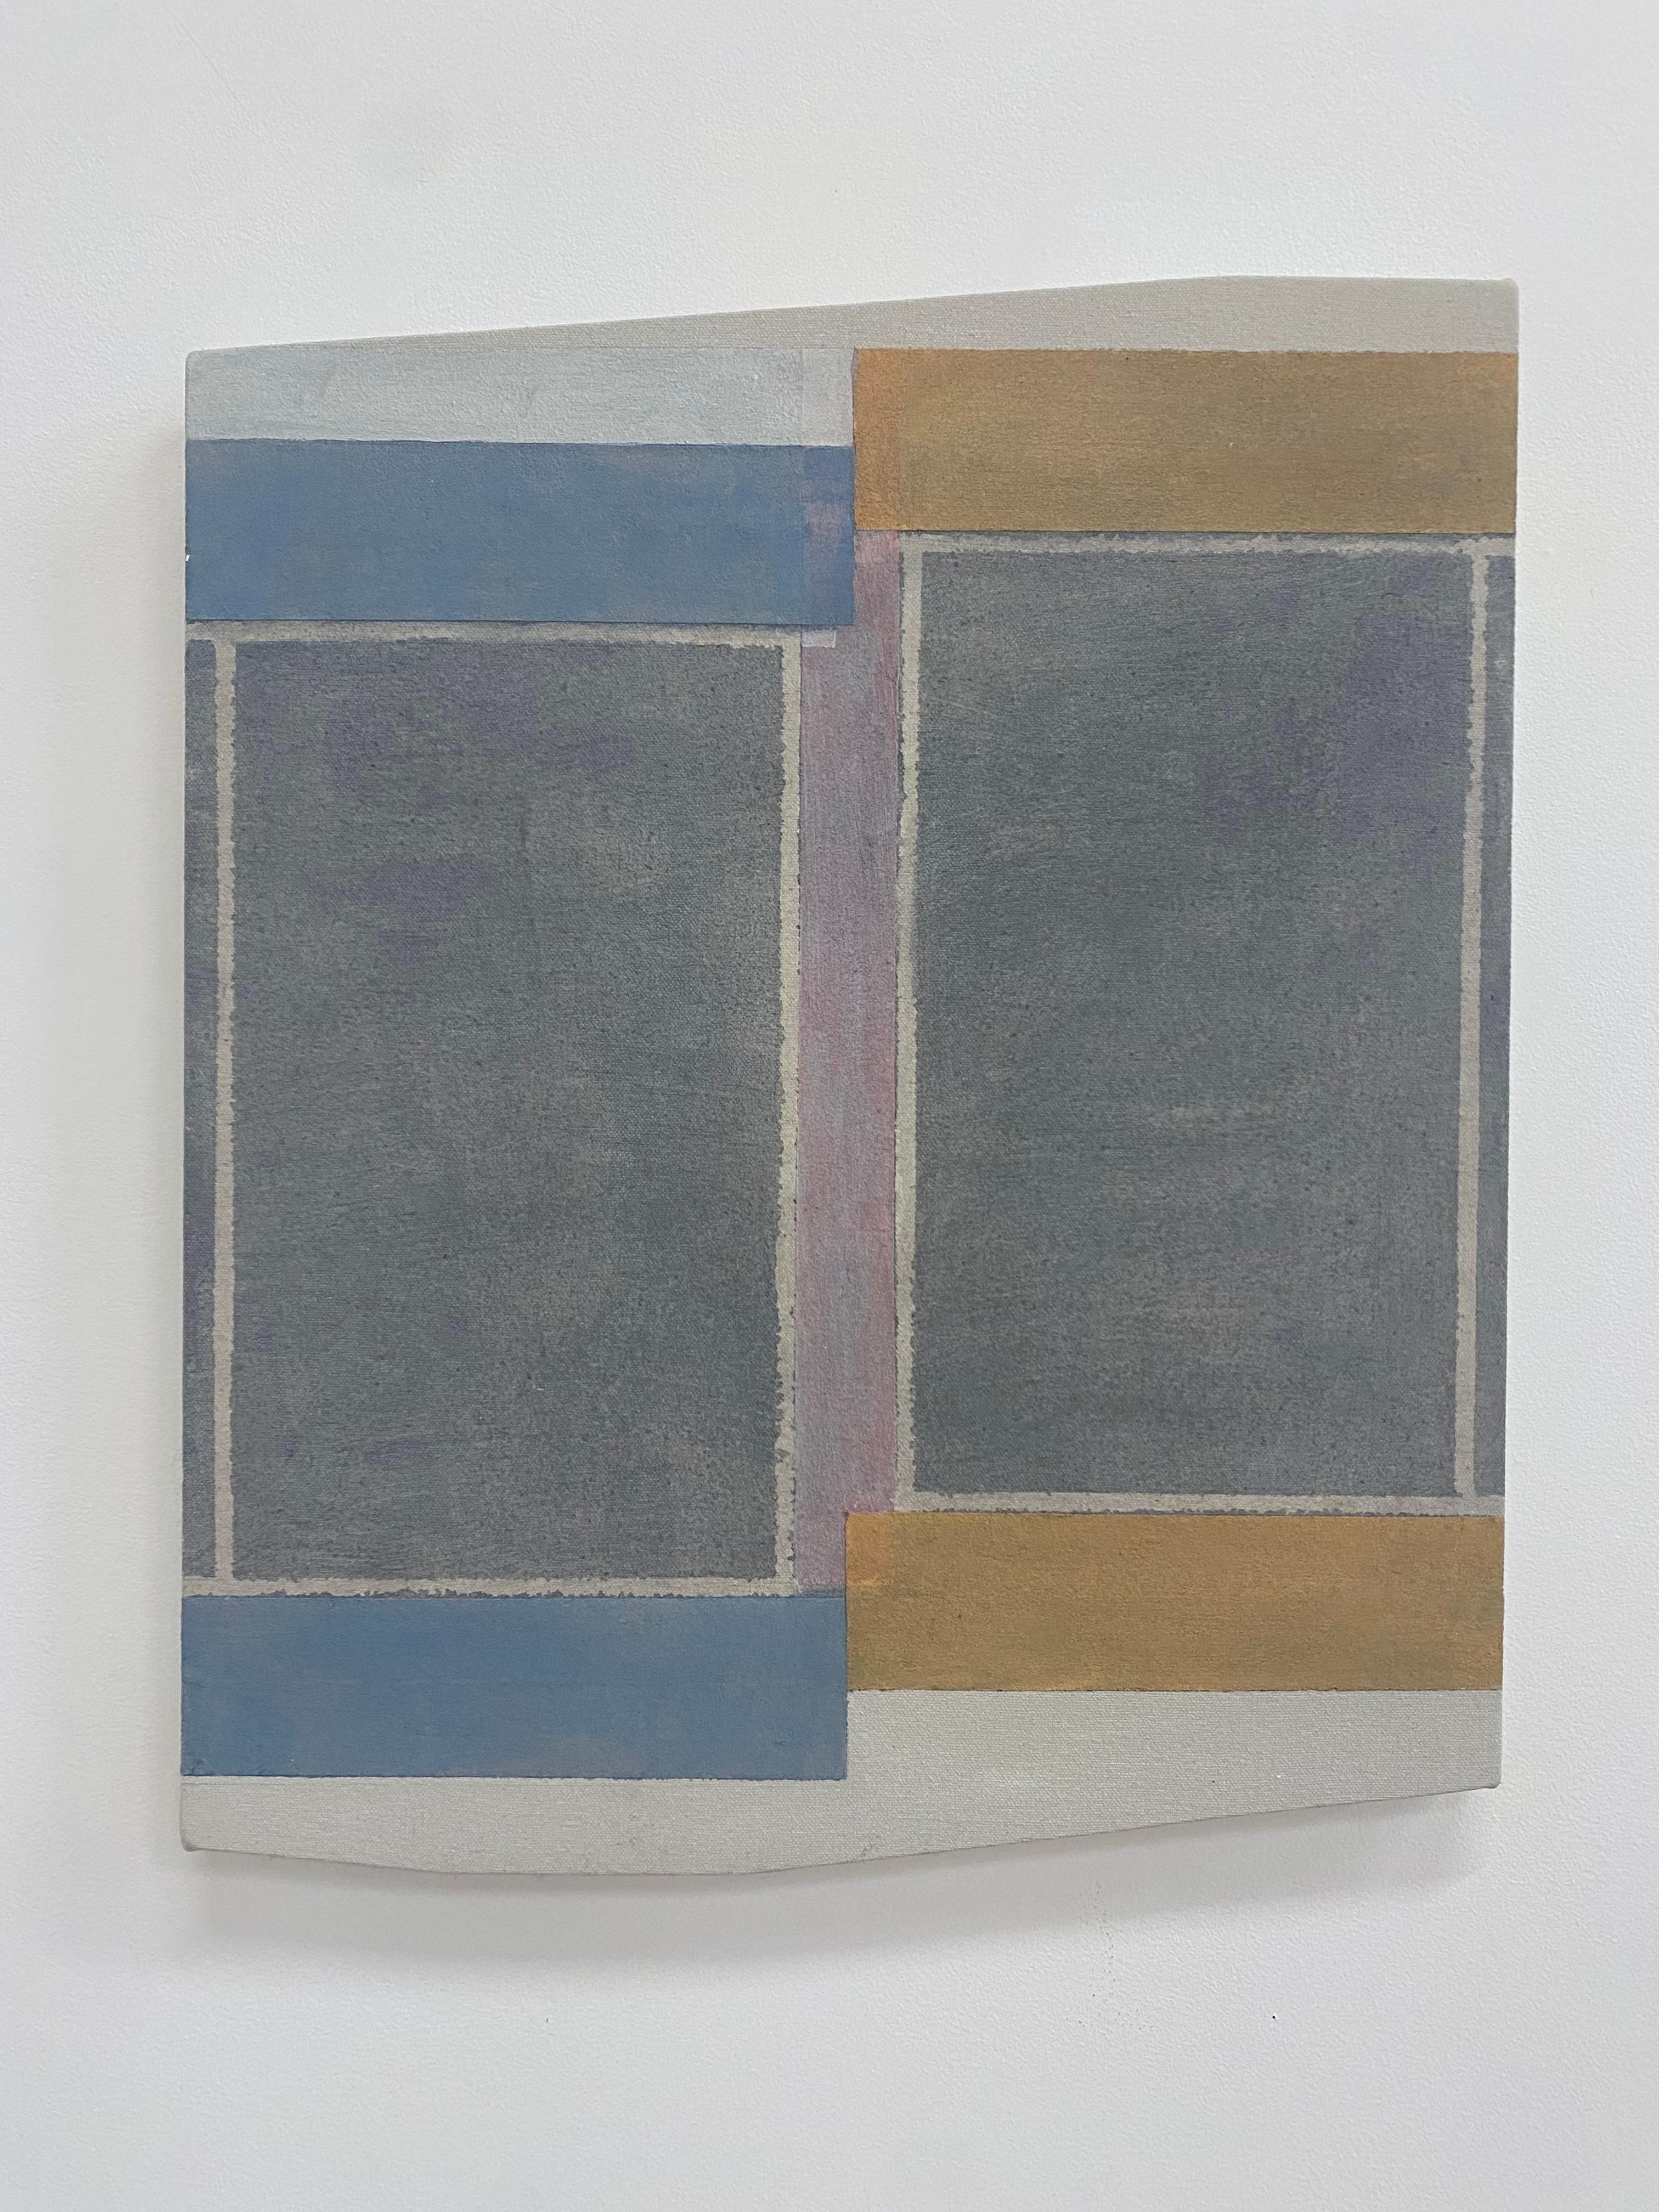 Carefully ordered horizontal blocks of color in yellow ochre, light lilac and light blue frame sections of gray with light lilac in the center in this painting on an asymmetrical shaped panel. Signed, dated and titled on verso.

Elizabeth Gourlay’s